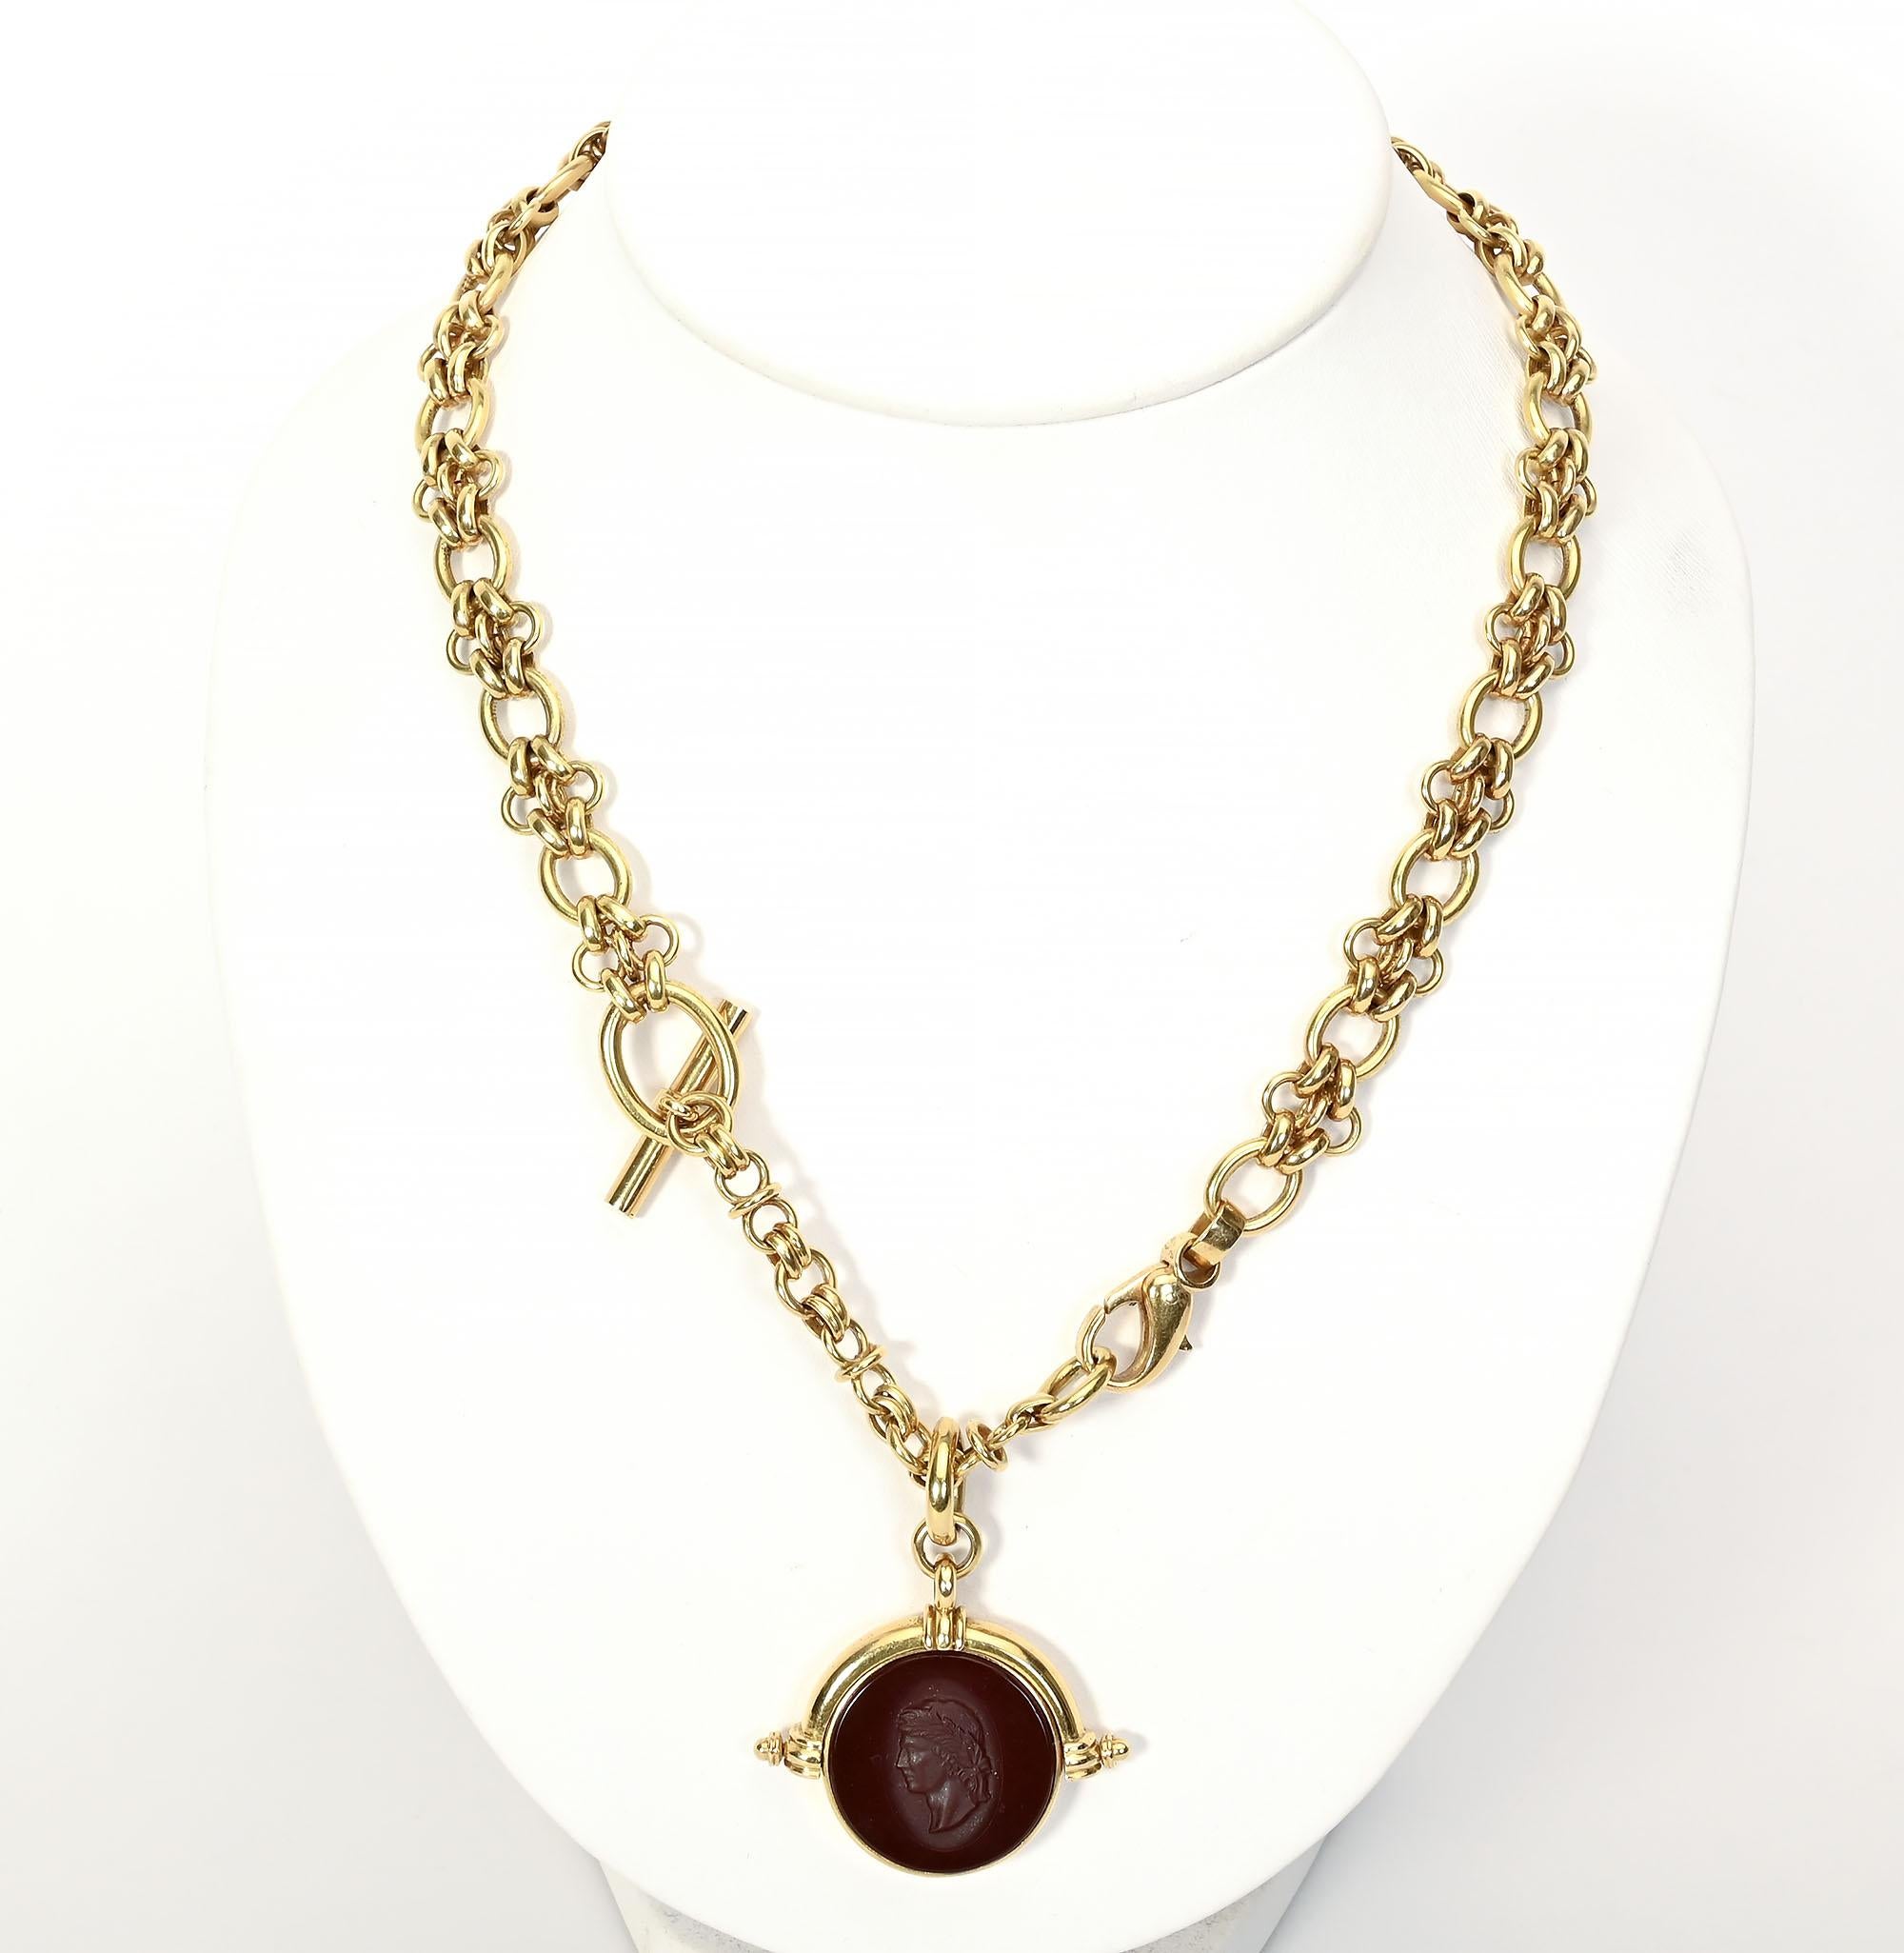 Artisan Handmade Gold Necklace with Carnelian Pendant For Sale